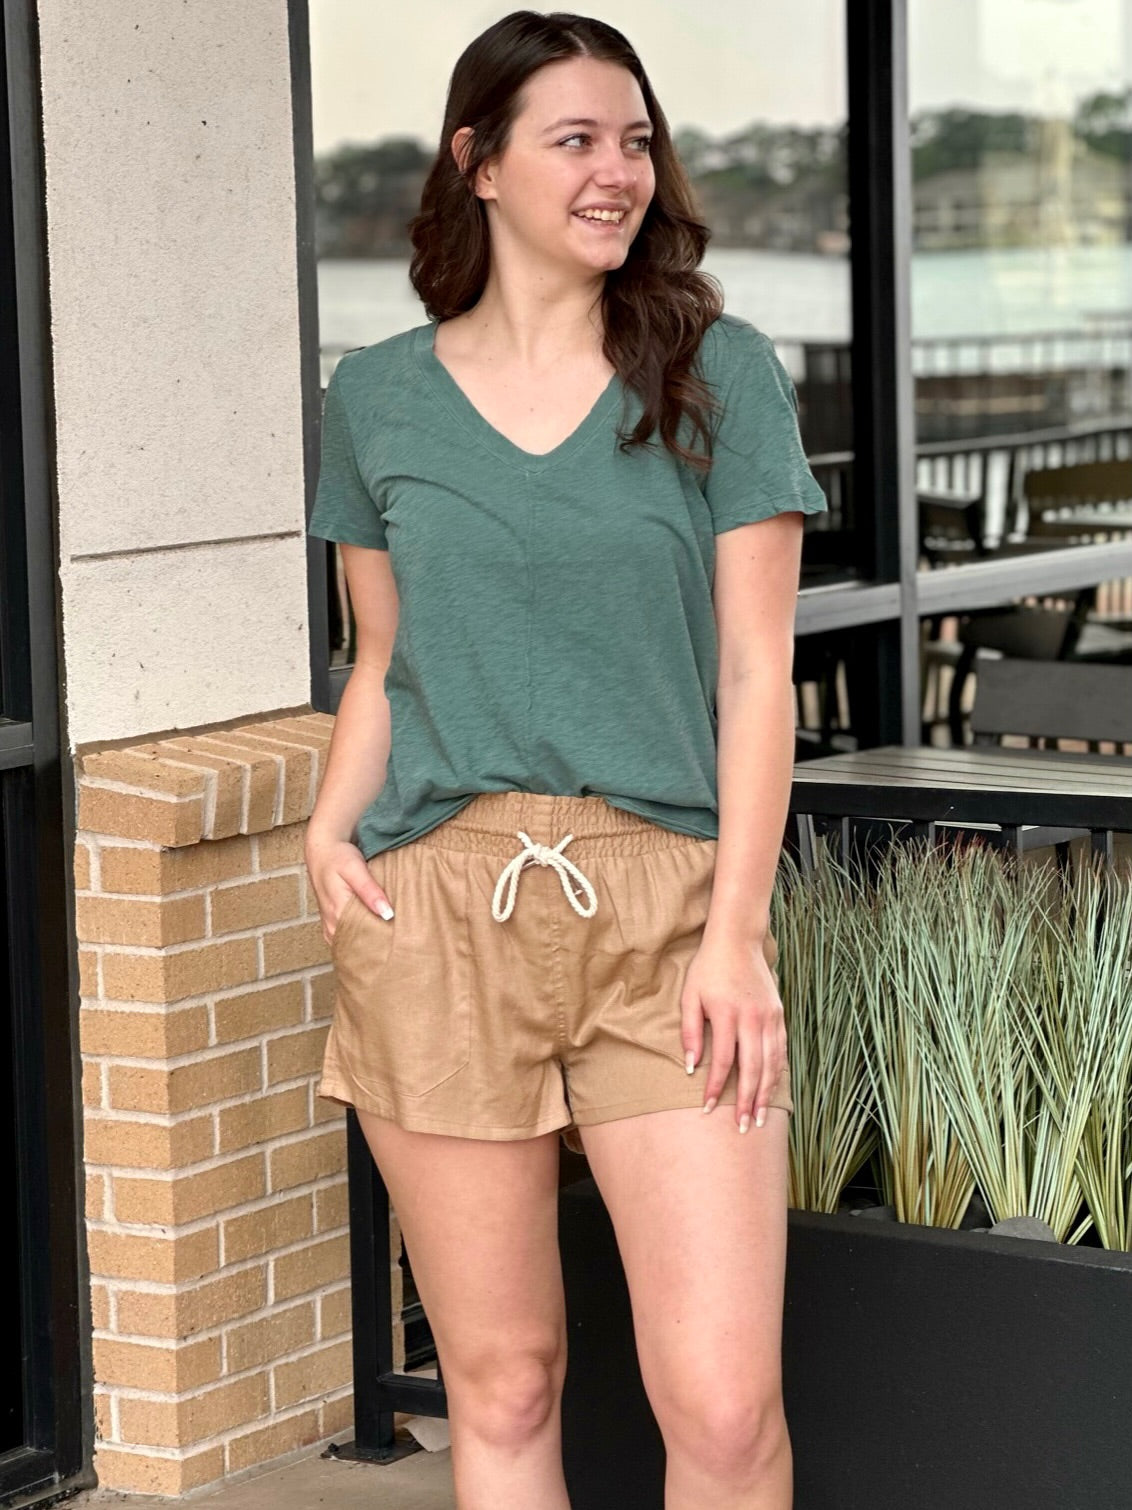 MEGAN LOOKING TO HER RIGHT IN SHORTS